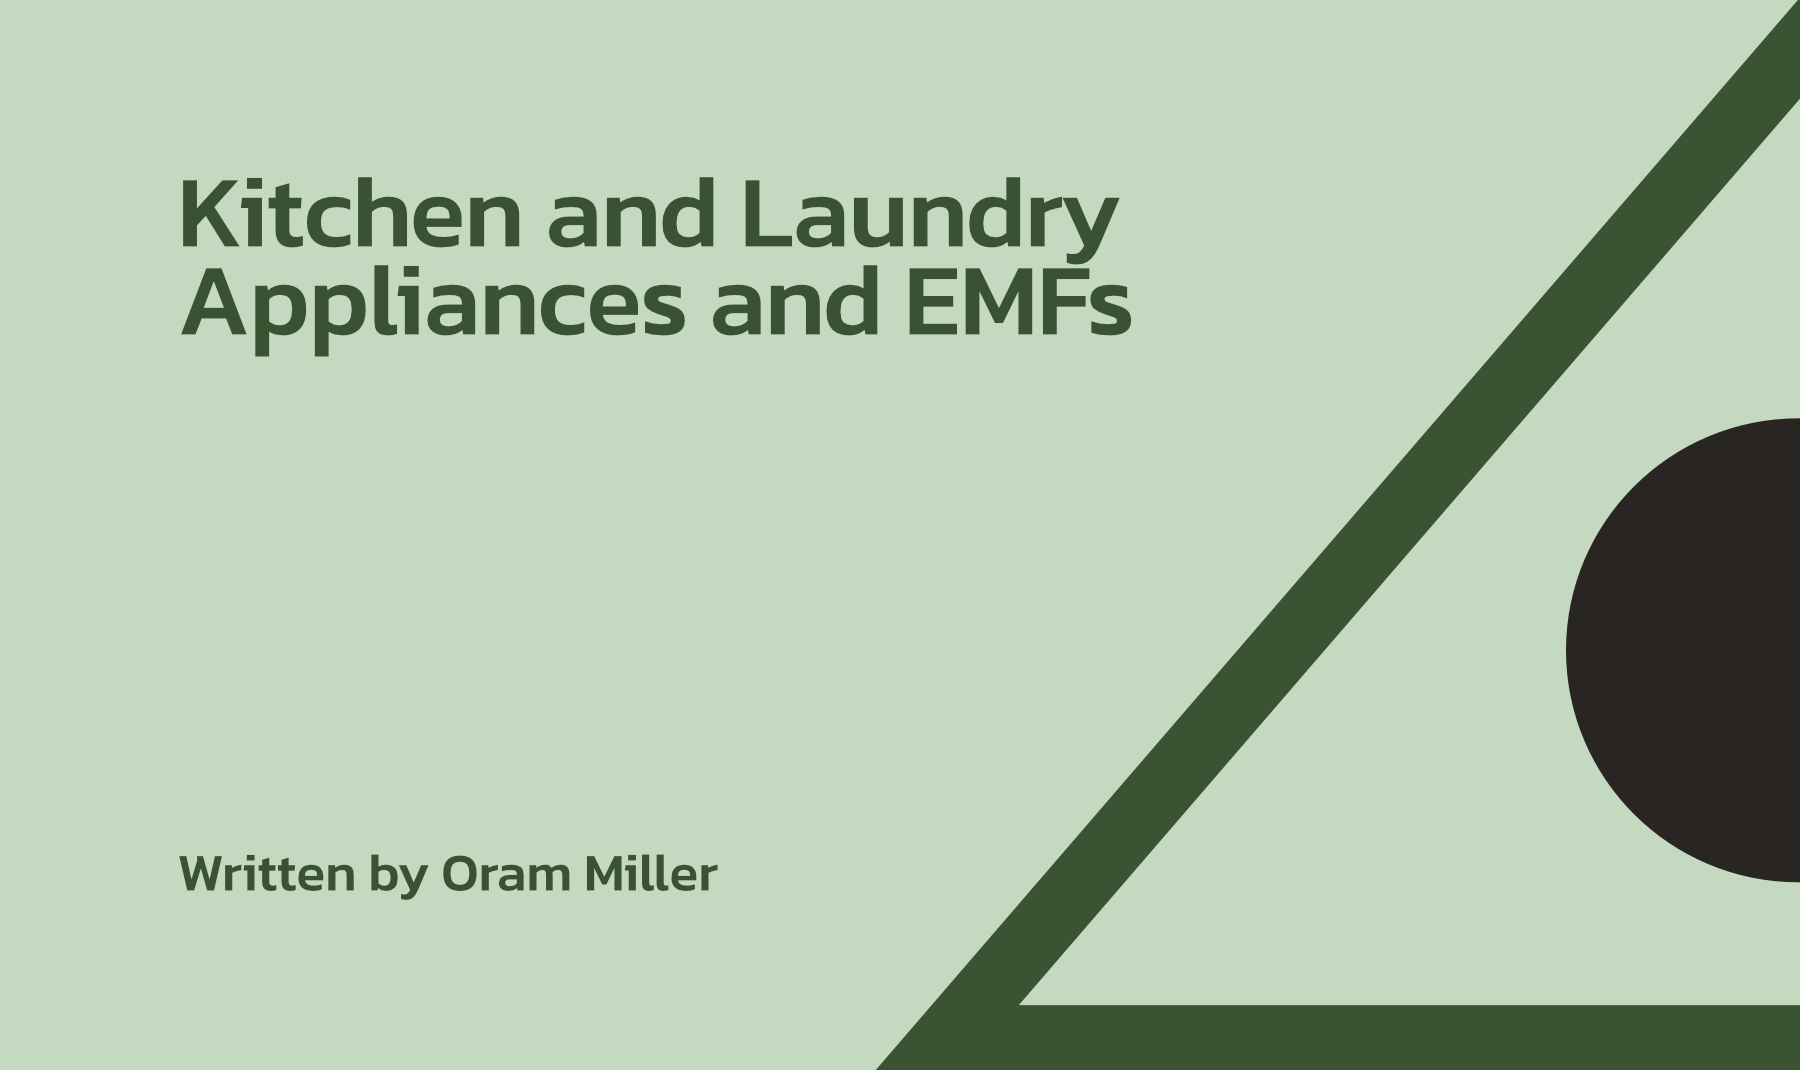 Kitchen and Laundry Appliances and EMFs